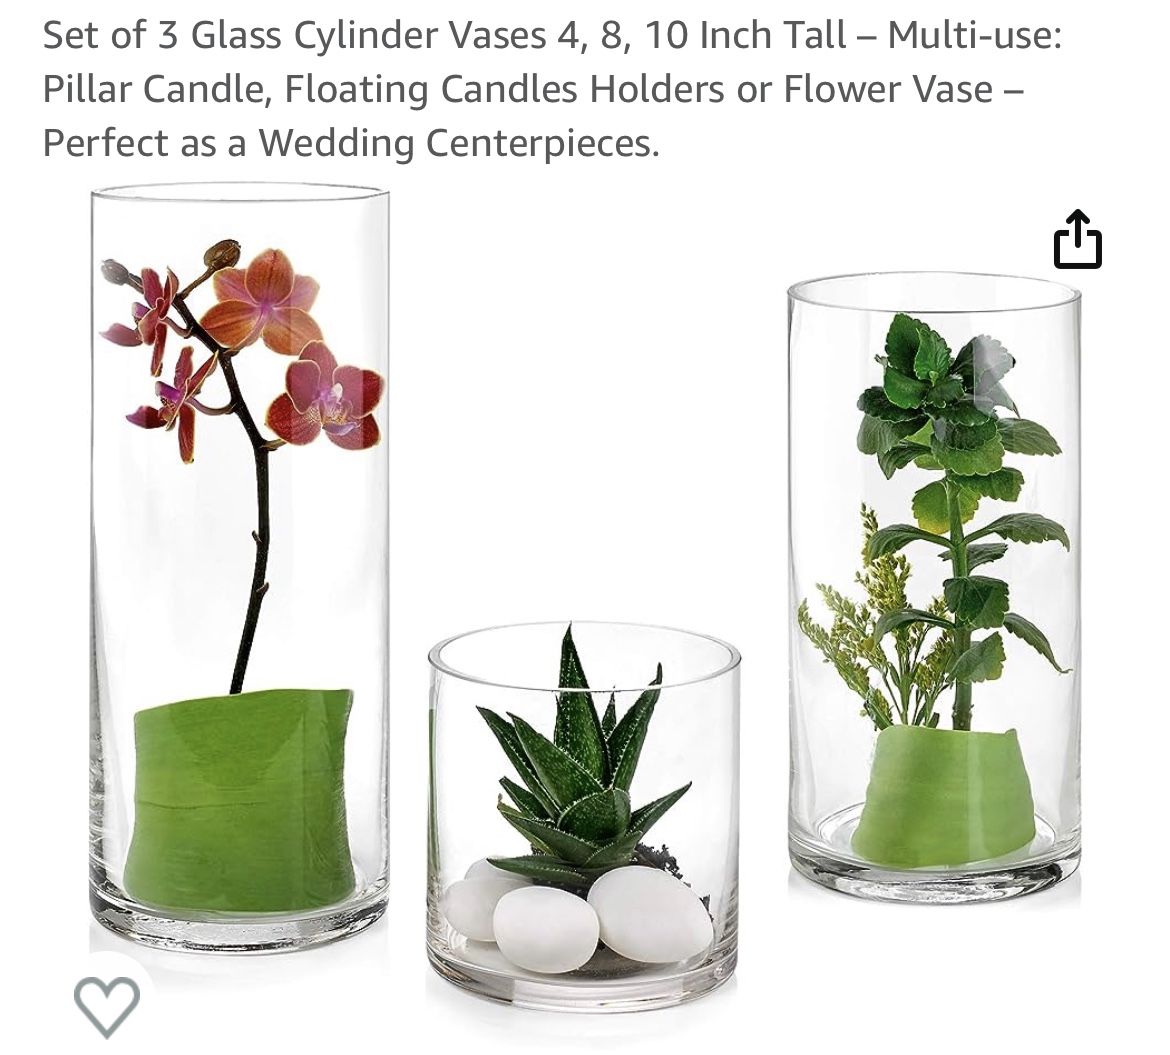 Set of 3 Glass Cylinder Vases 4, 8, 10 Inch Tall – Multi-use: Pillar Candle, Floating Candles Holders or Flower Vase – Perfect as a Wedding Centerpiec